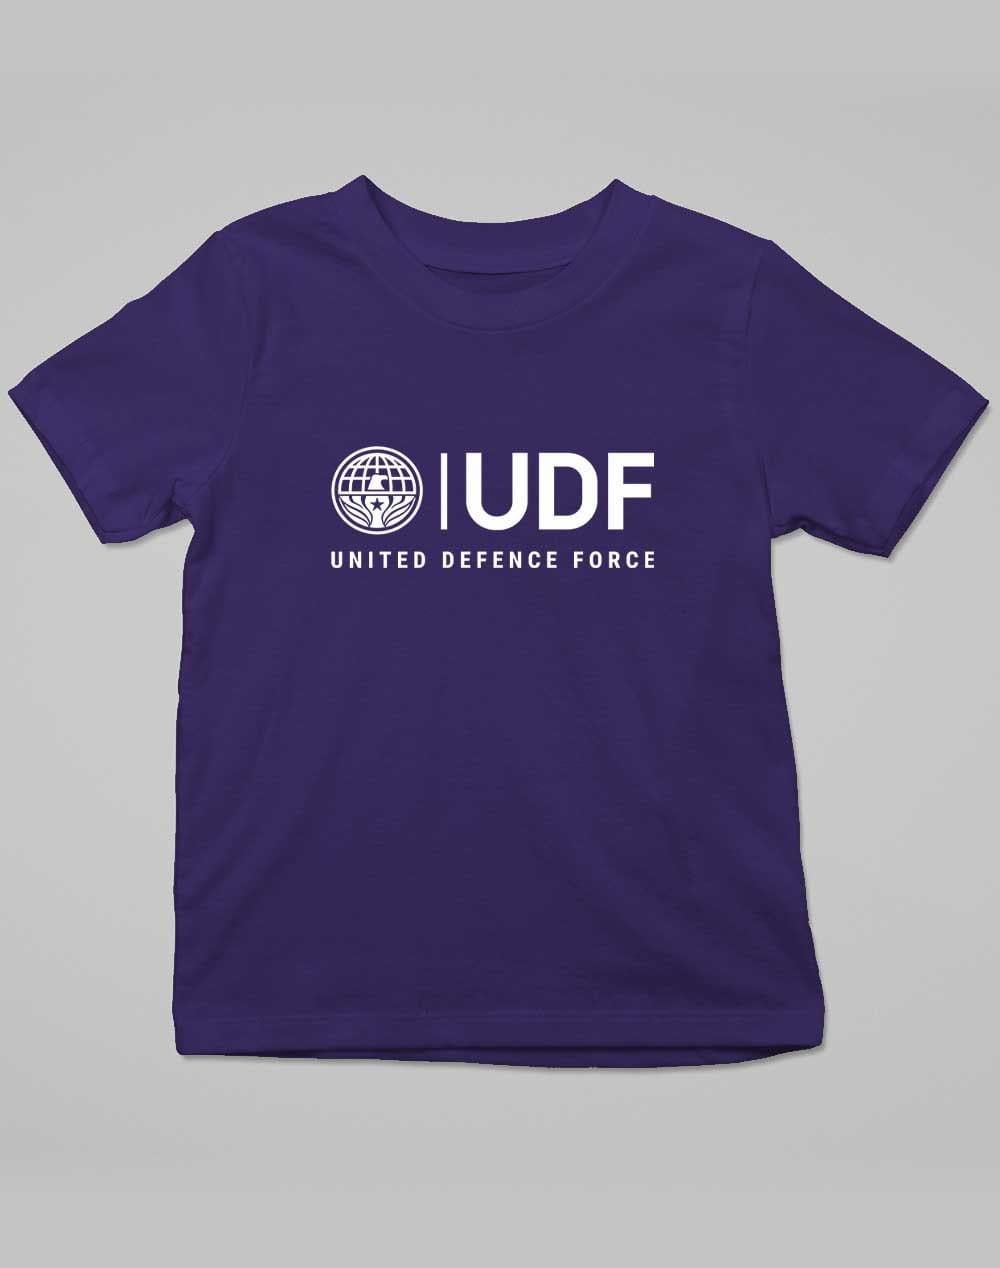 UDF United Defense Force Kids T-Shirt 3-4 years / Navy  - Off World Tees